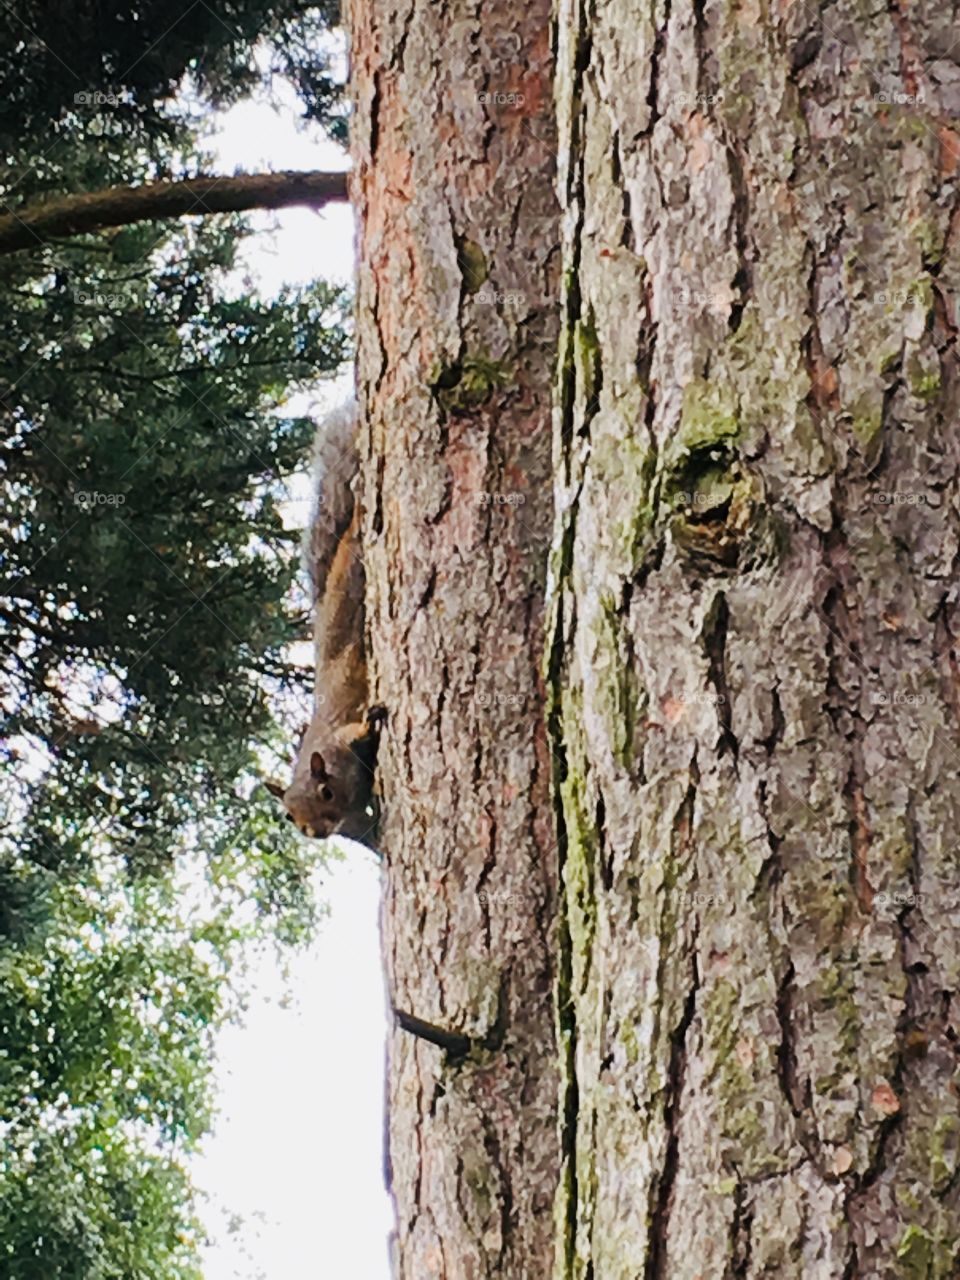 Squirrel upside down on tree bark peeping around a pine tree in my garden in England